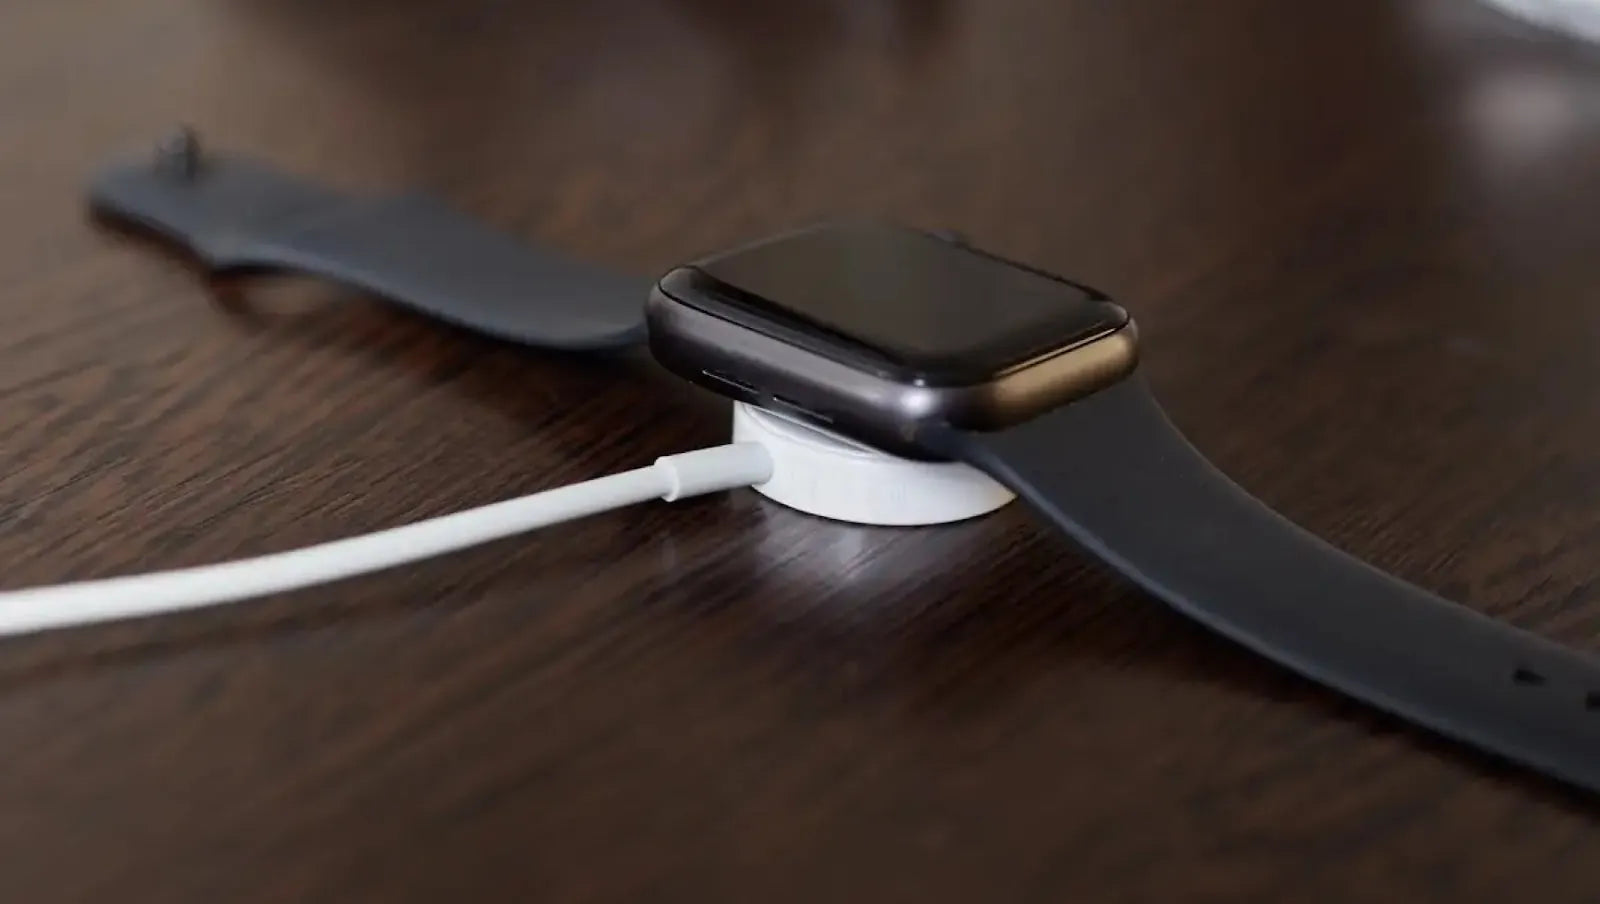 What To Do If My Apple Watch Is Not Charging Properly